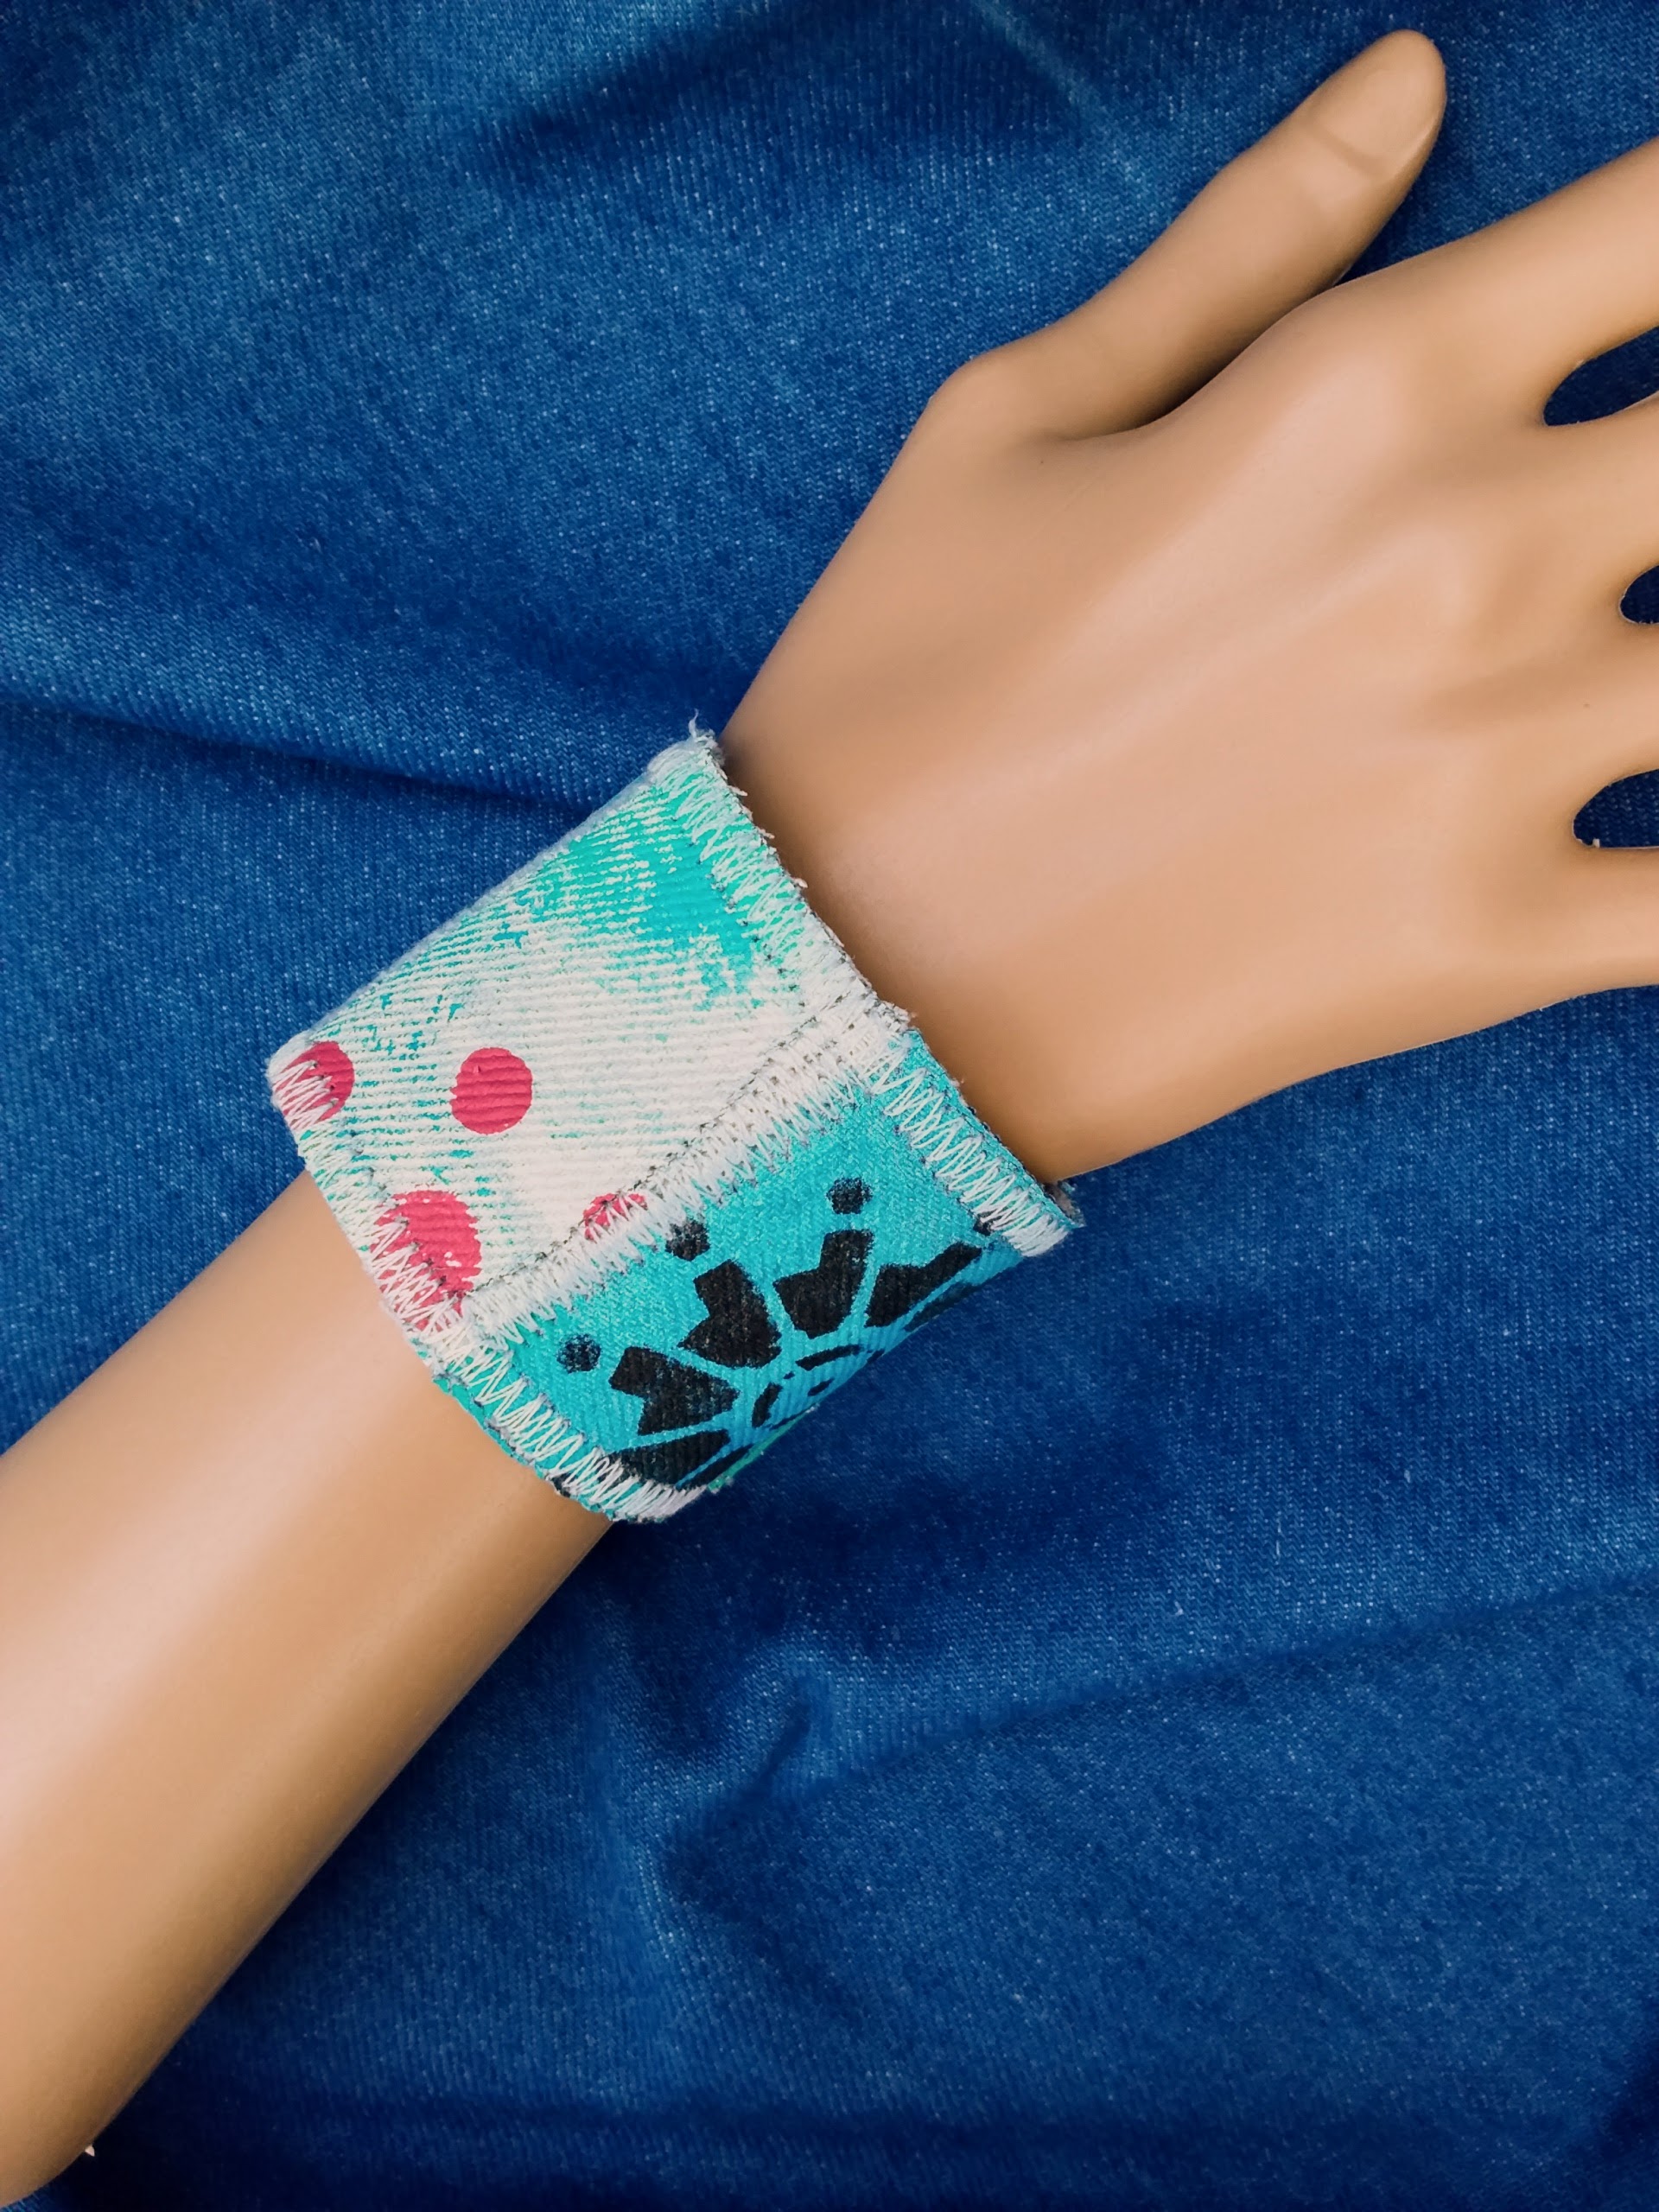 A recycled denim cuff bracelet with hand painted design